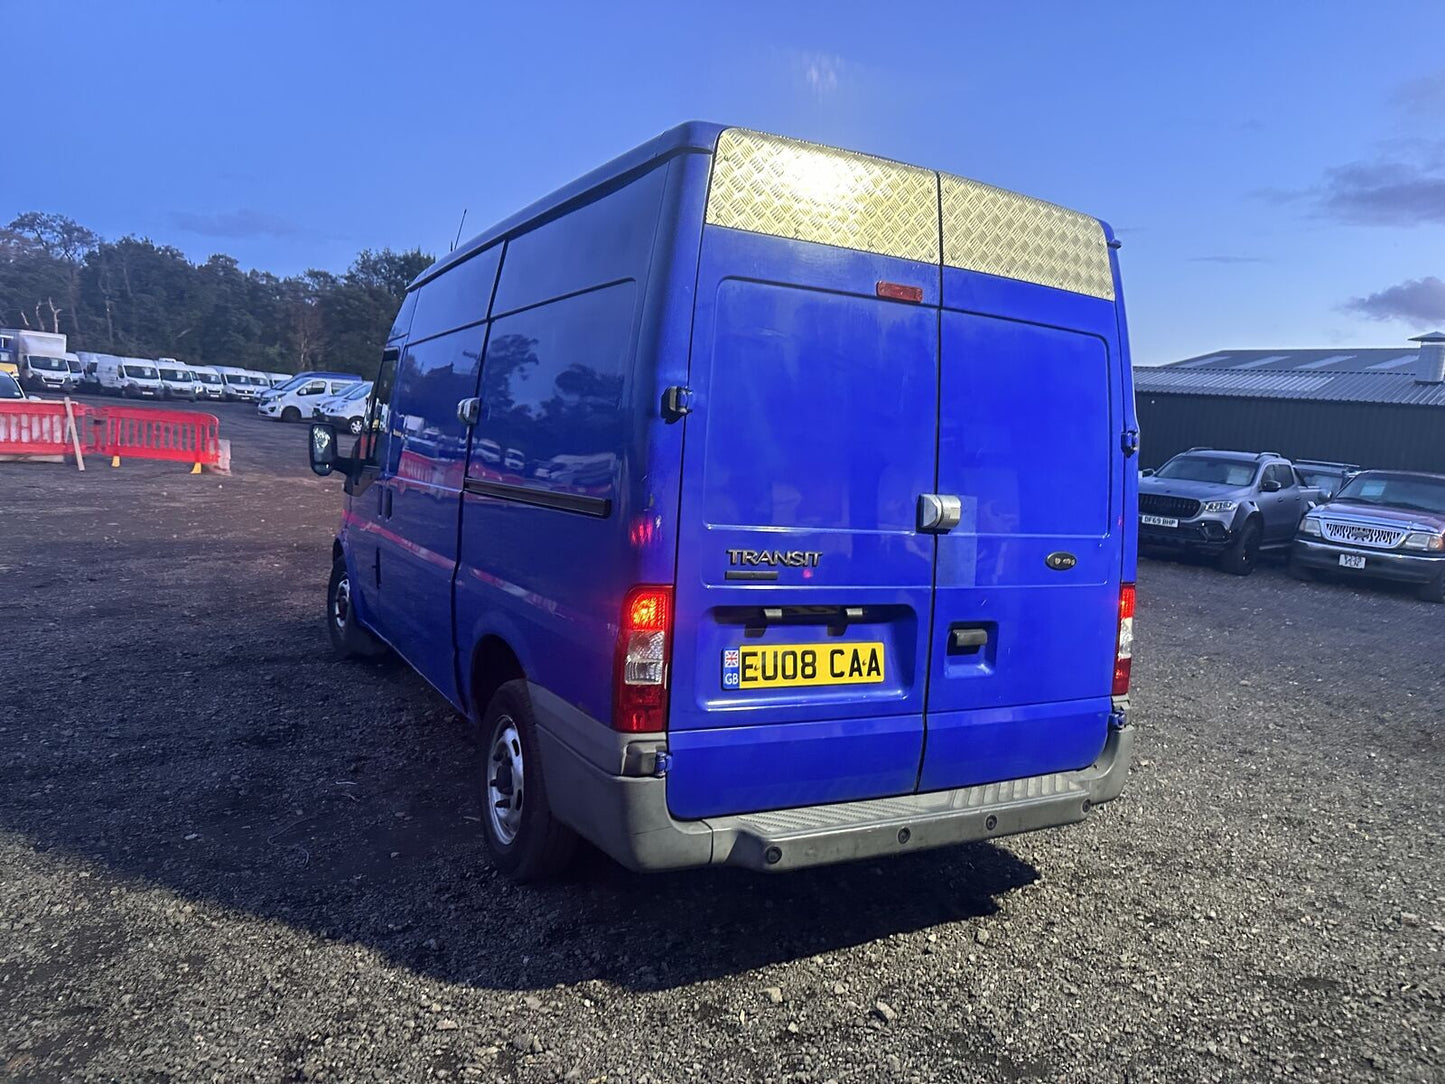 Bid on BLUE WORKHORSE: 2008 FORD TRANSIT EX BRITISH GAS 138K MILES - NO VAT ON HAMMER- Buy &amp; Sell on Auction with EAMA Group